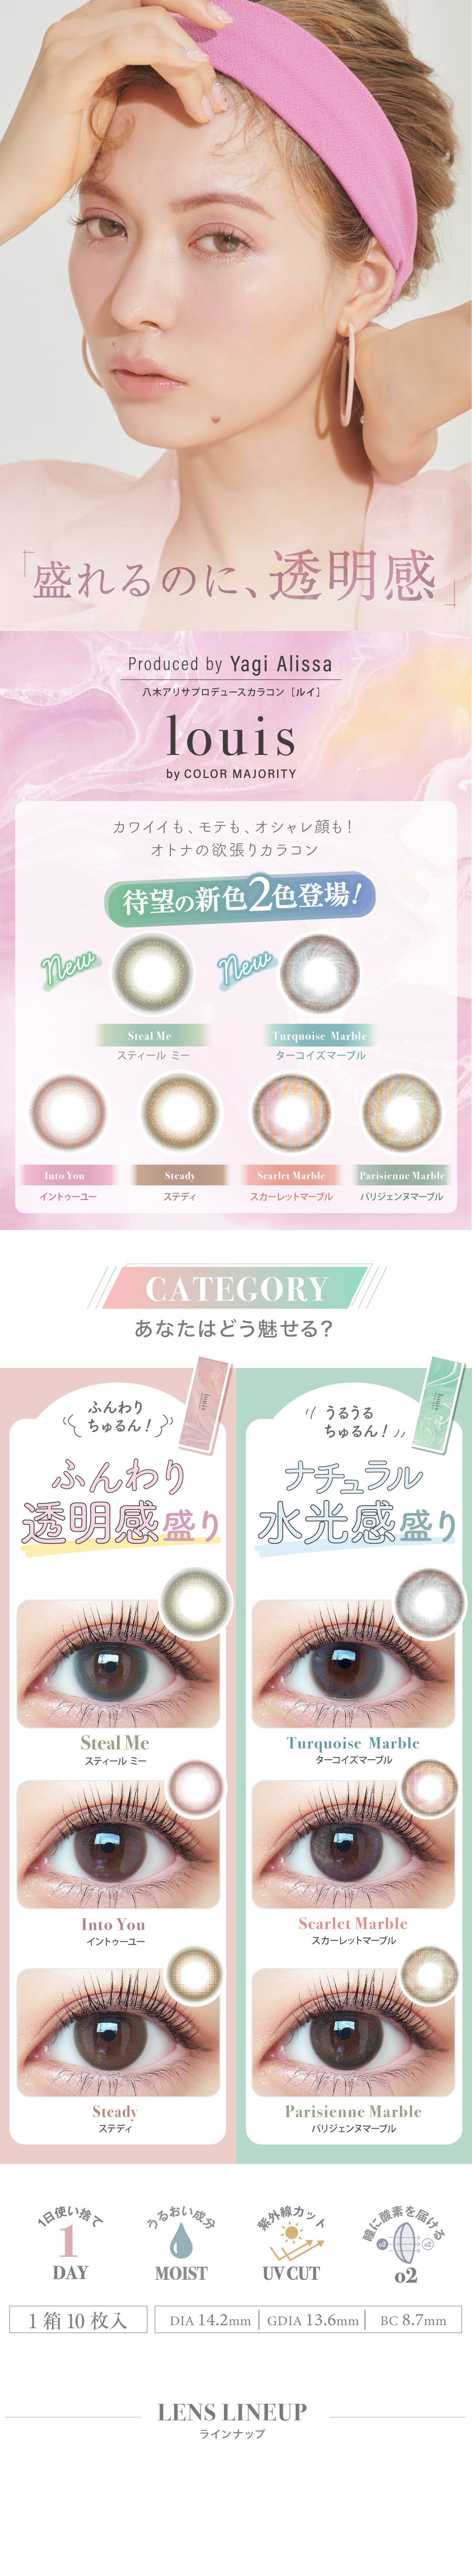 louis by COLOR MAJORITY(ルイ バイ カラーマジョリティー)[14.2mm/1day/10枚] COLOR MAJORITY  LILY ANNA リリーアンナ | 人気カラコンLILMOON feliamo公式通販 | 度あり・度なし全商品送料無料！